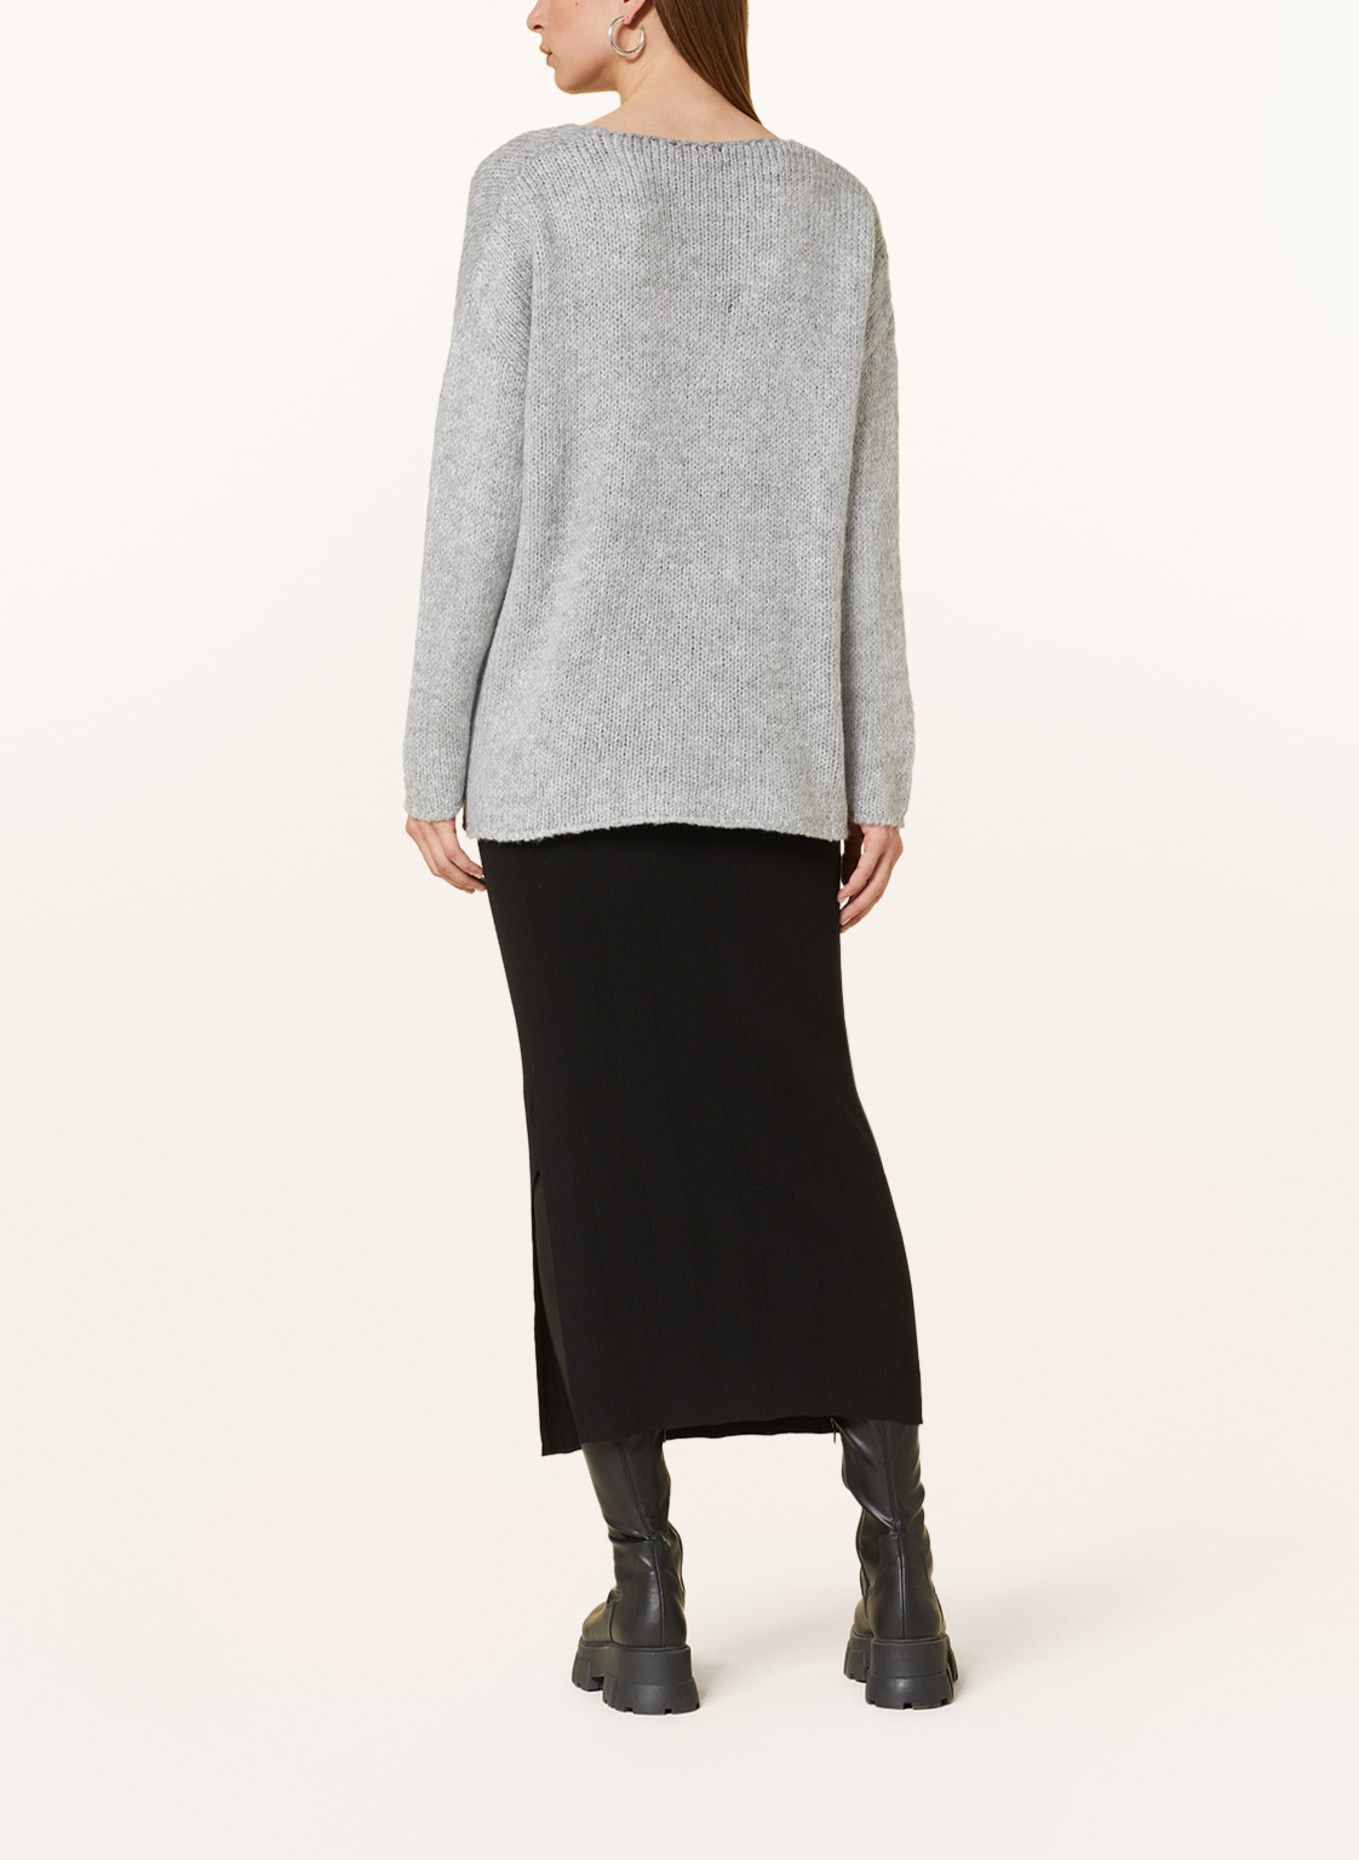 MORE & MORE Oversized sweater, Color: GRAY (Image 3)